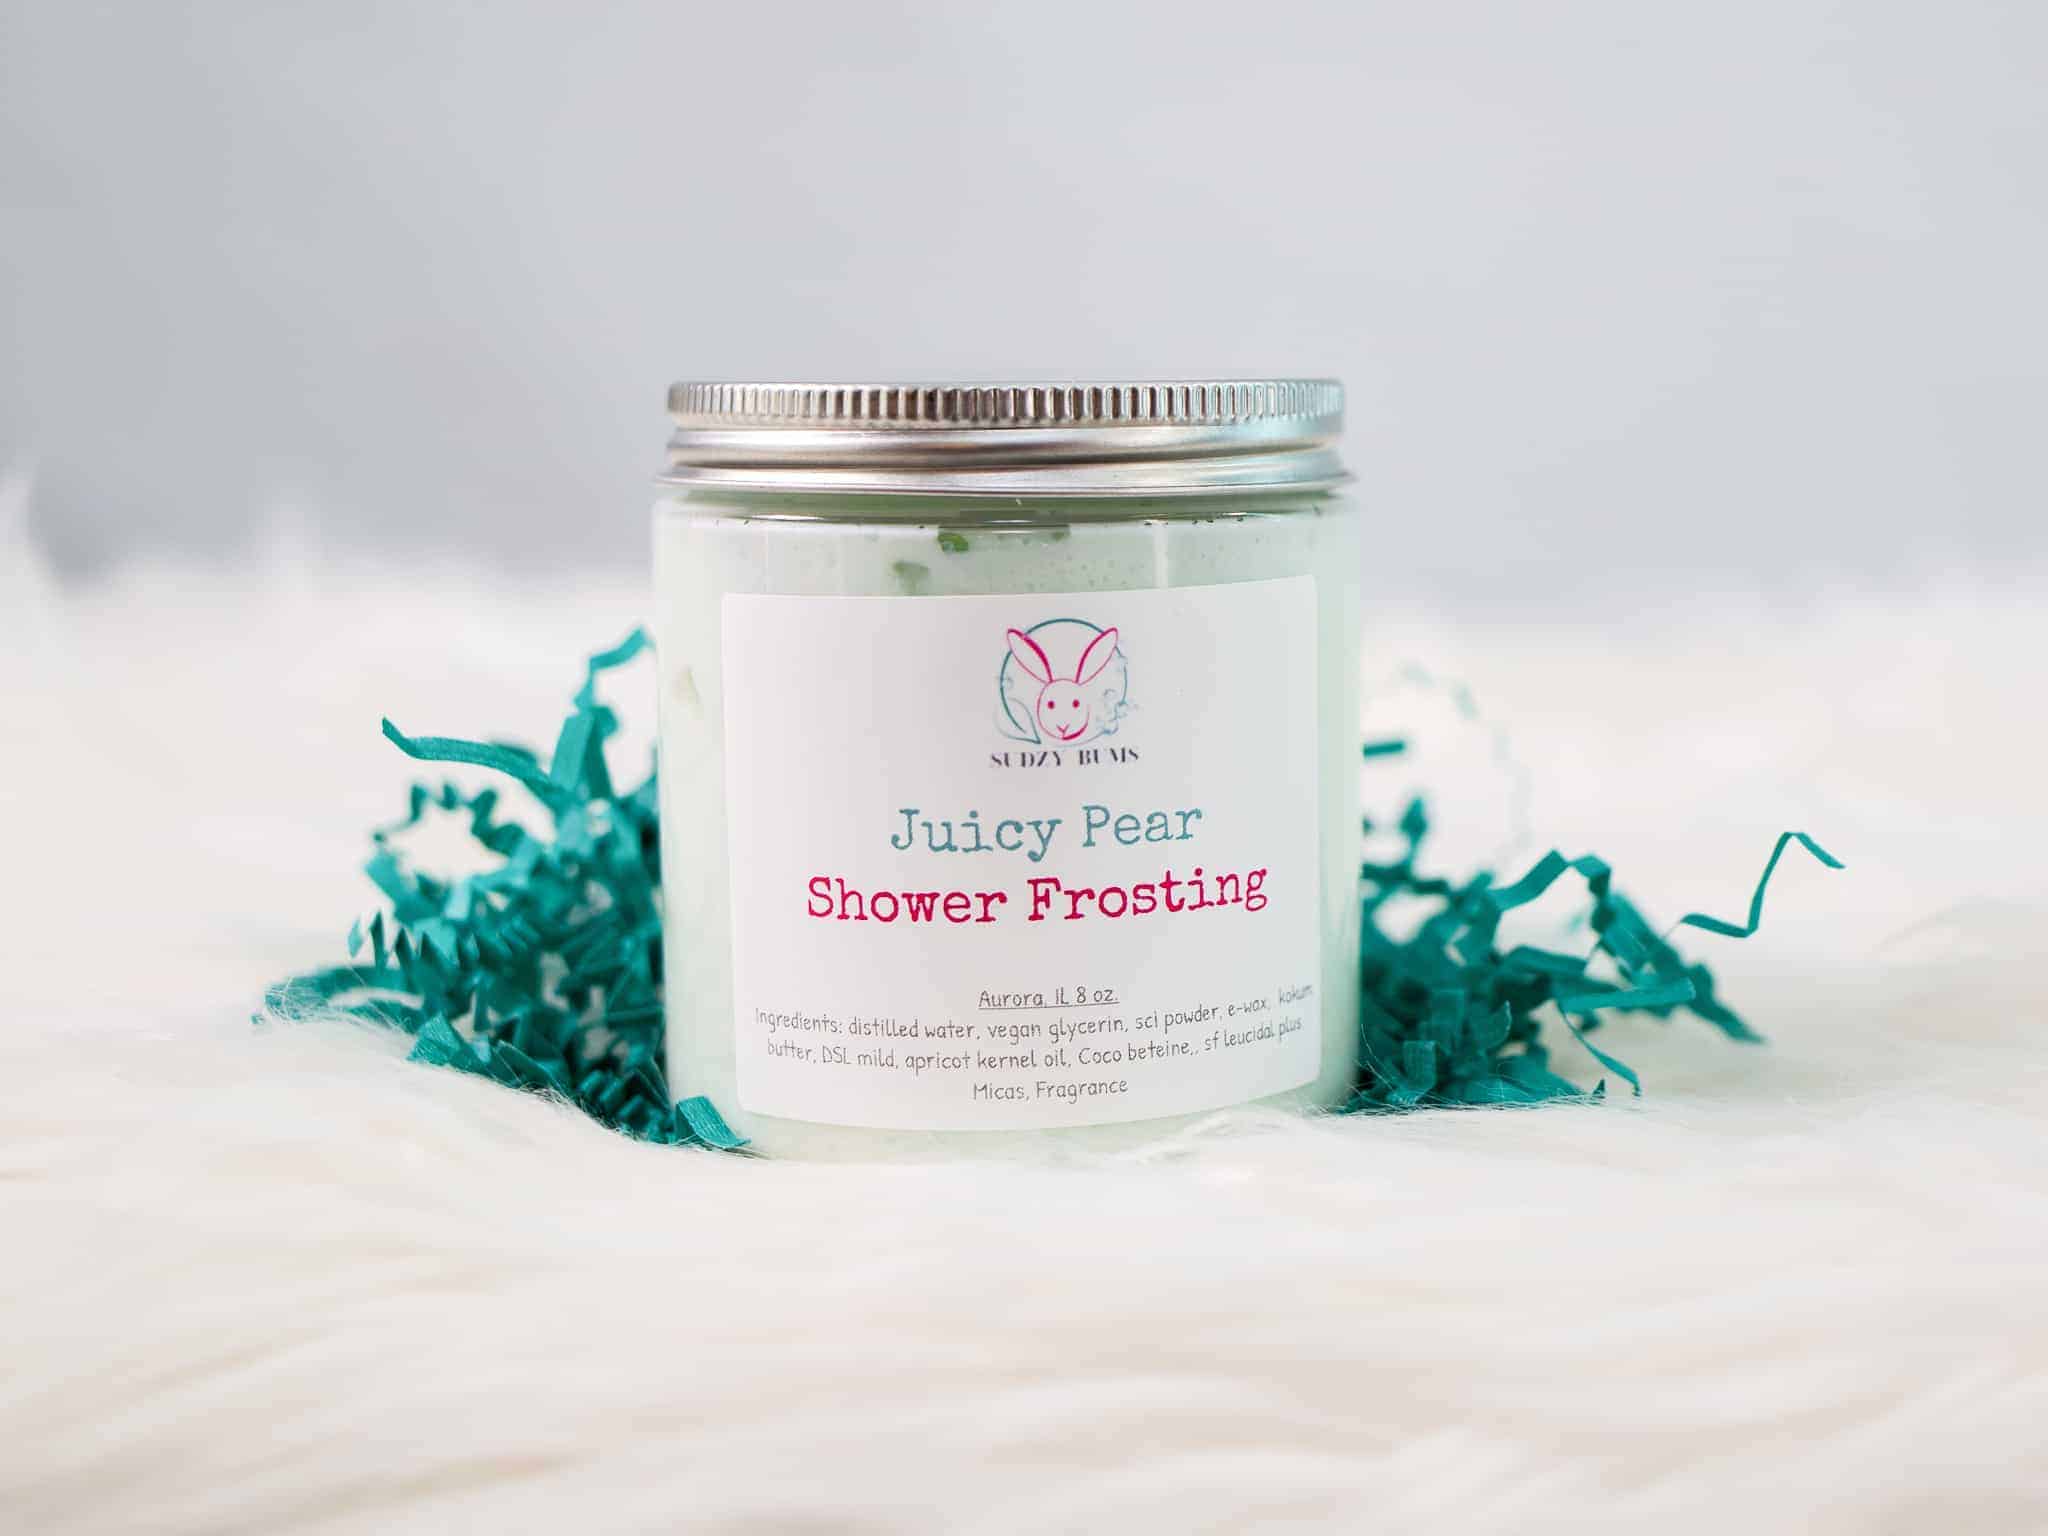 This Juicy Pear Vegan Shower Frosting is made with love by Sudzy Bums! Shop more unique gift ideas today with Spots Initiatives, the best way to support creators.